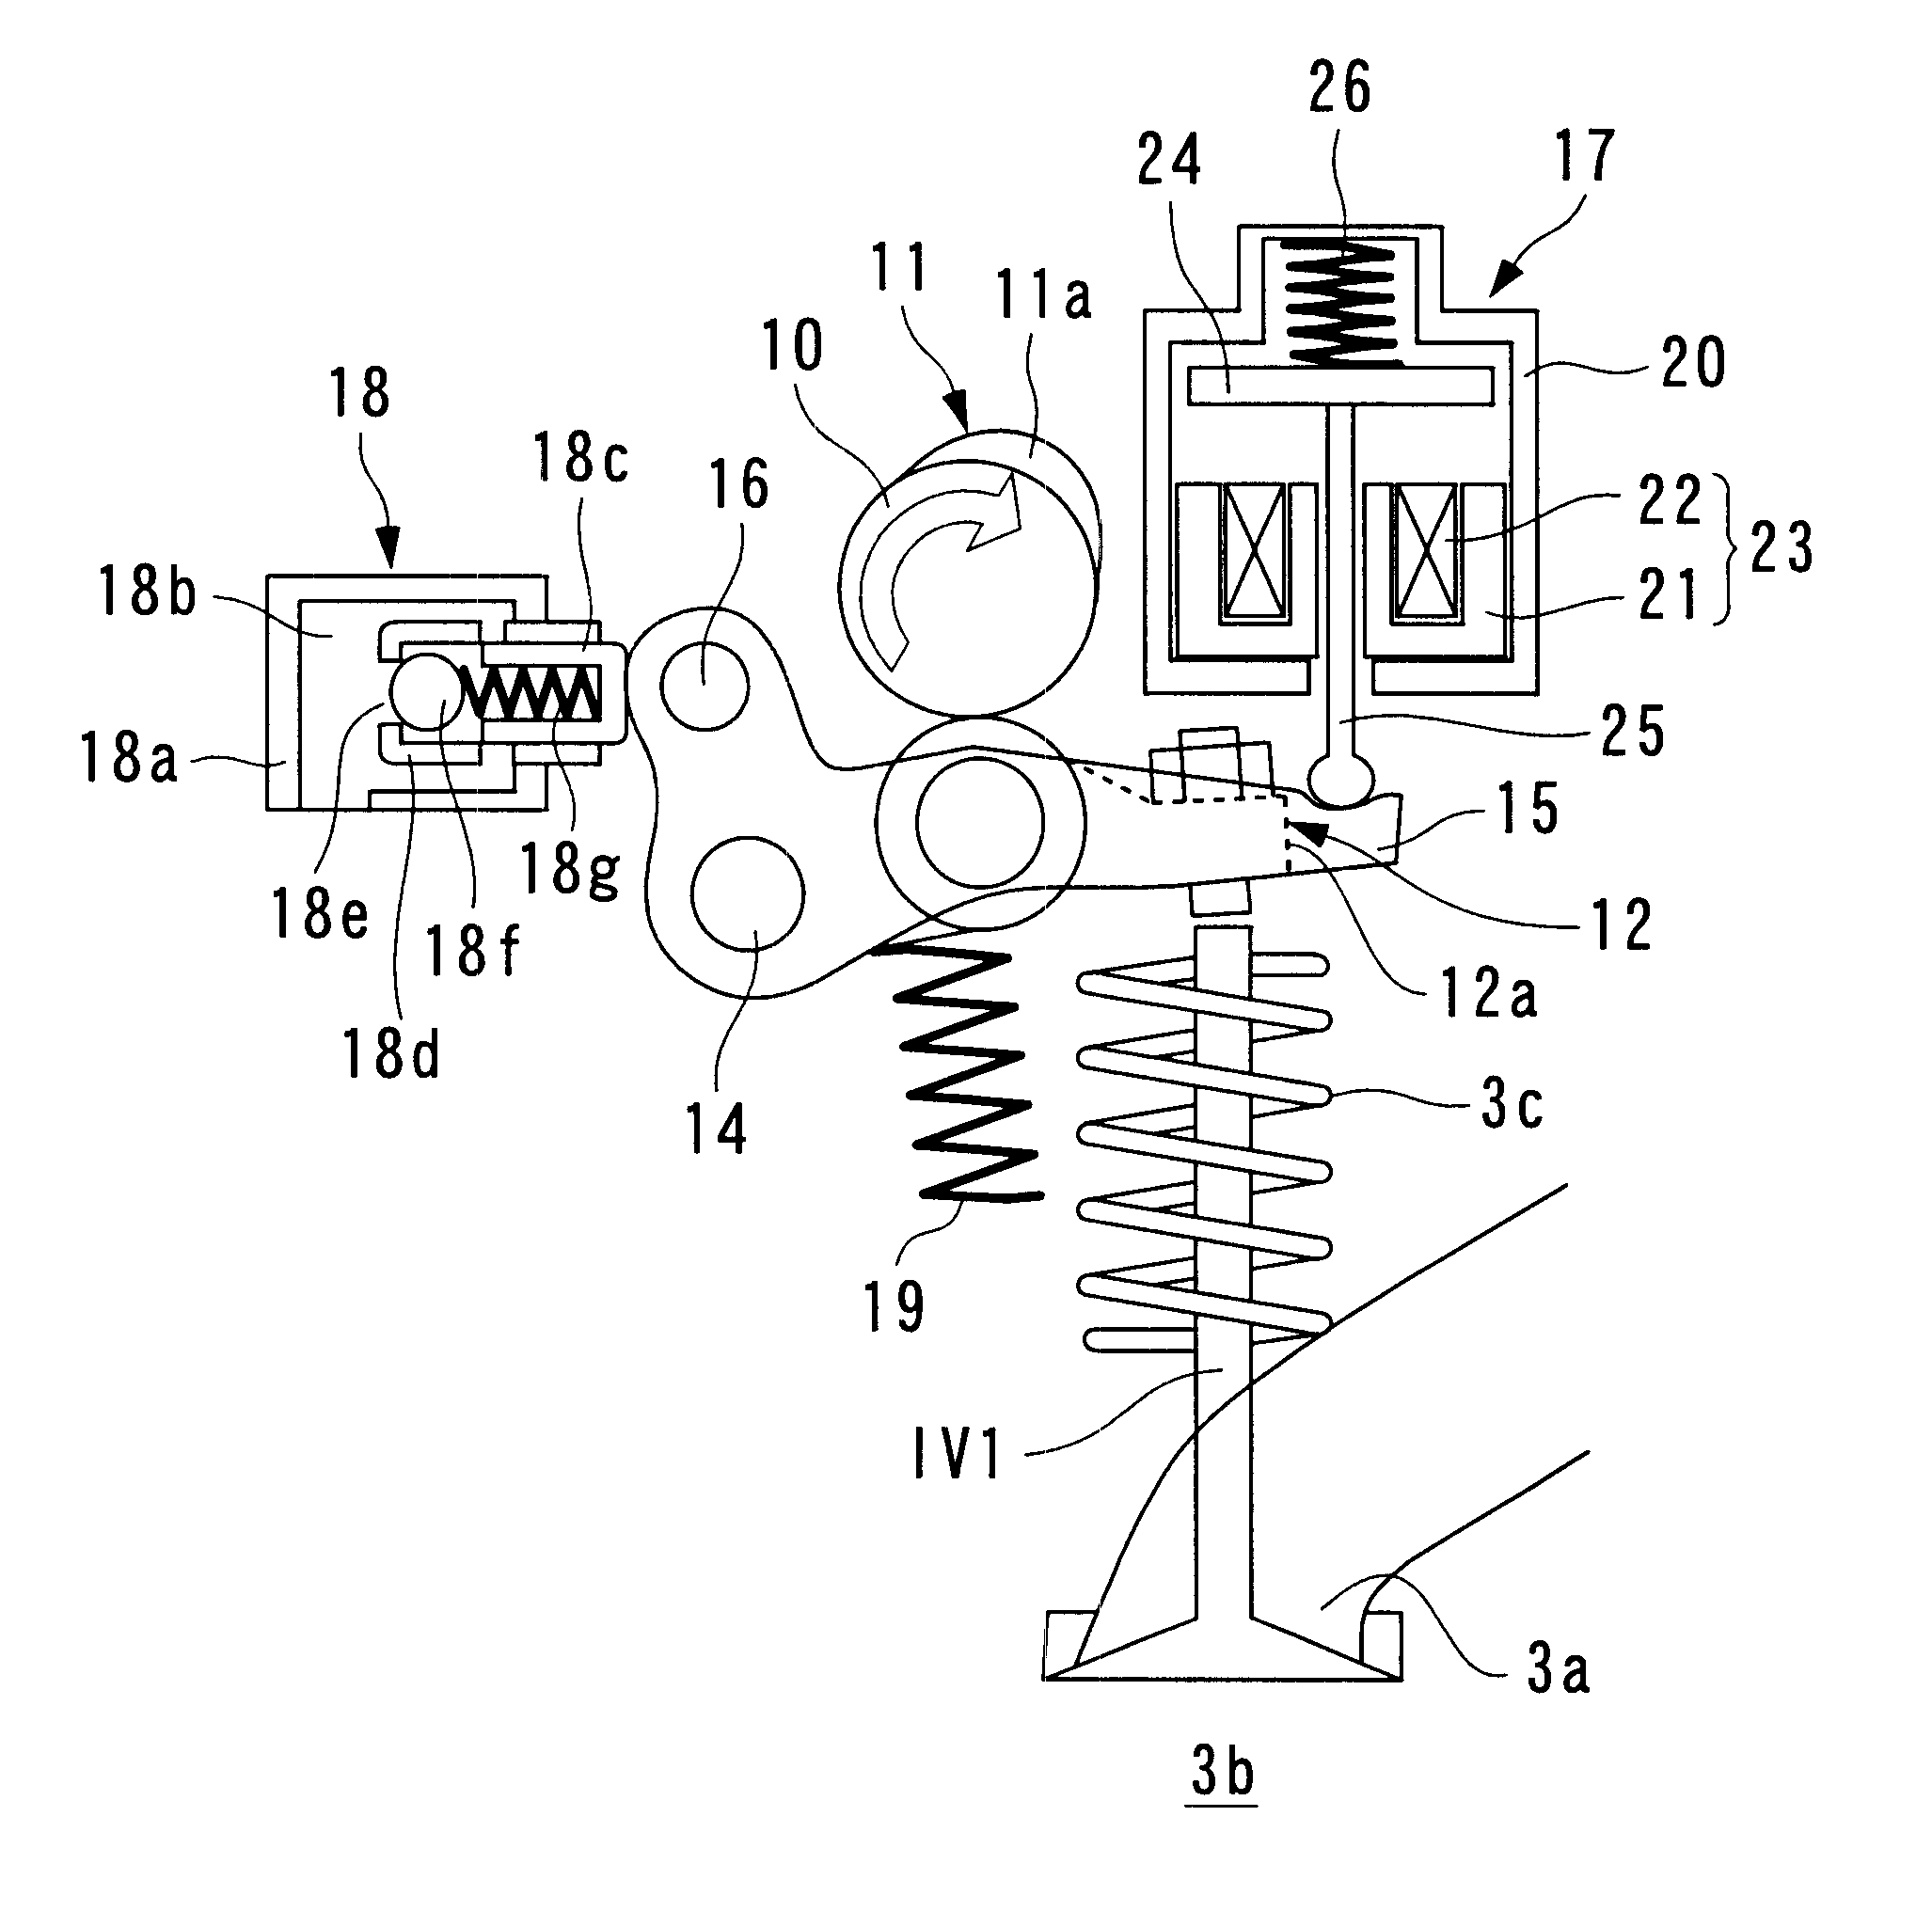 Valve timing control system for internal combustion engine